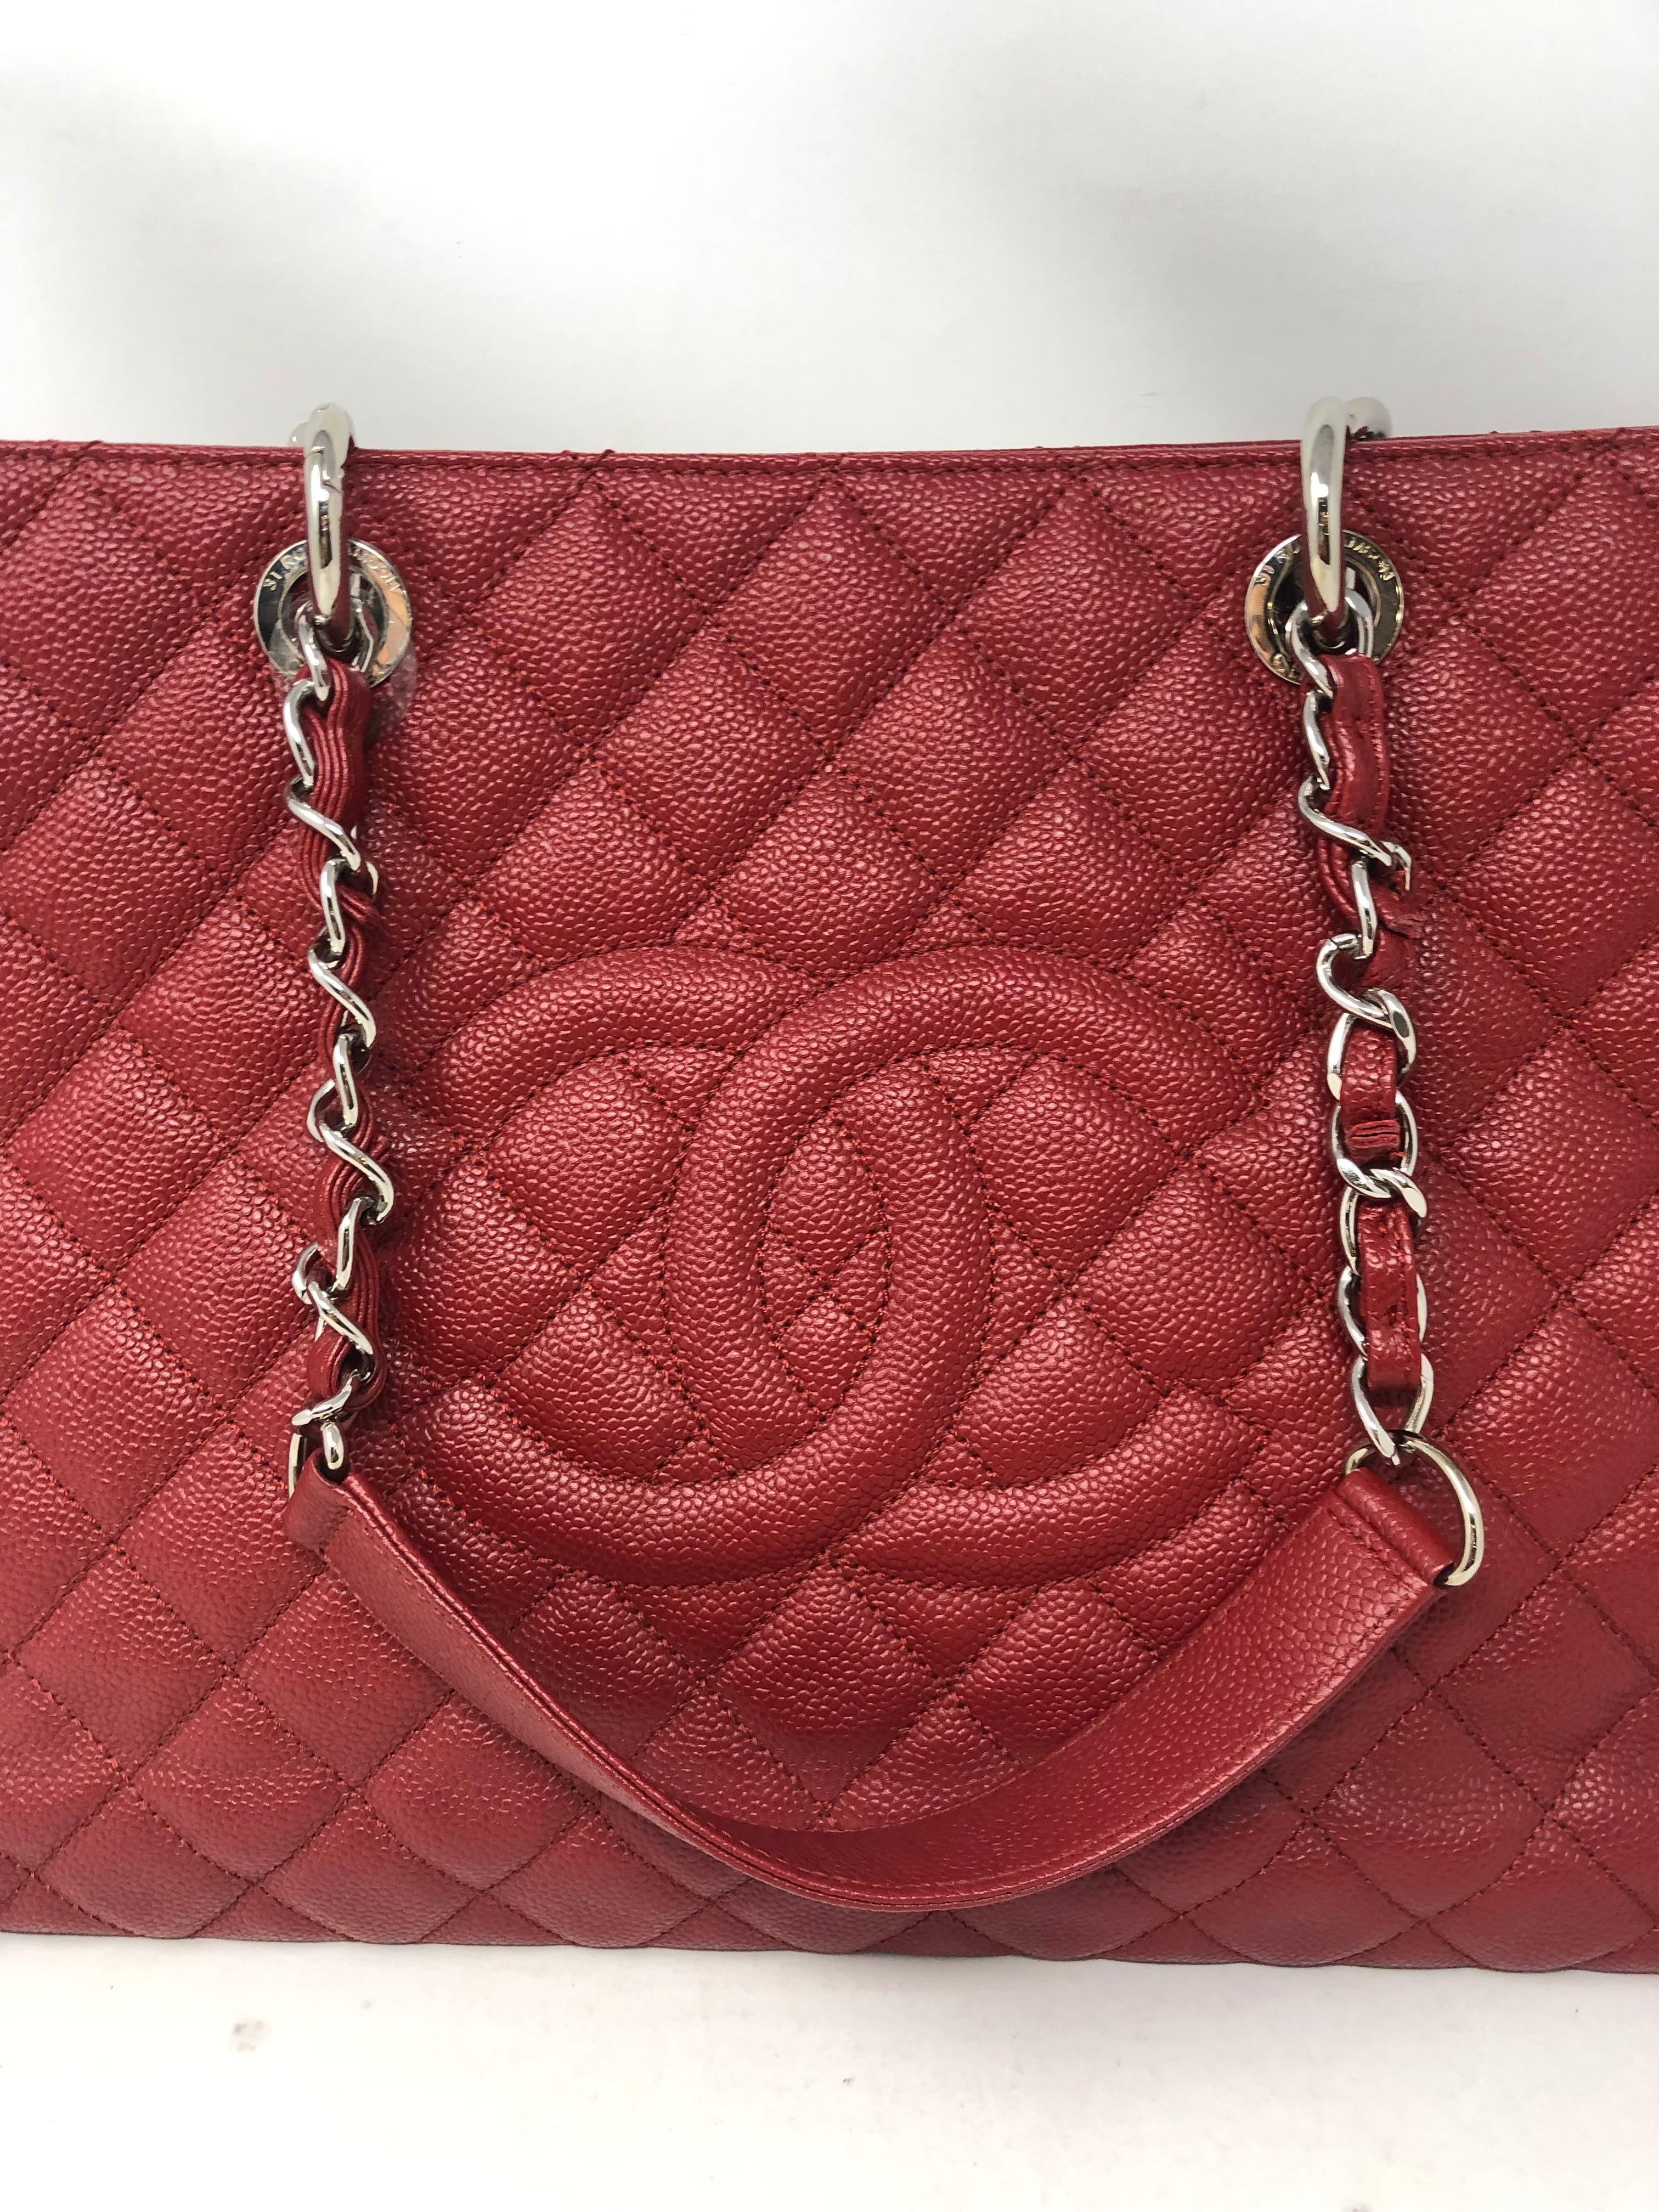 Chanel Red XL Grand Shopper Tote Bag. Caviar red leather with silver hardware. Mint condition. Plastic still on hardware. Beautiful bag that is retired from Chanel. Hard to find XL size. Guaranteed authentic. 